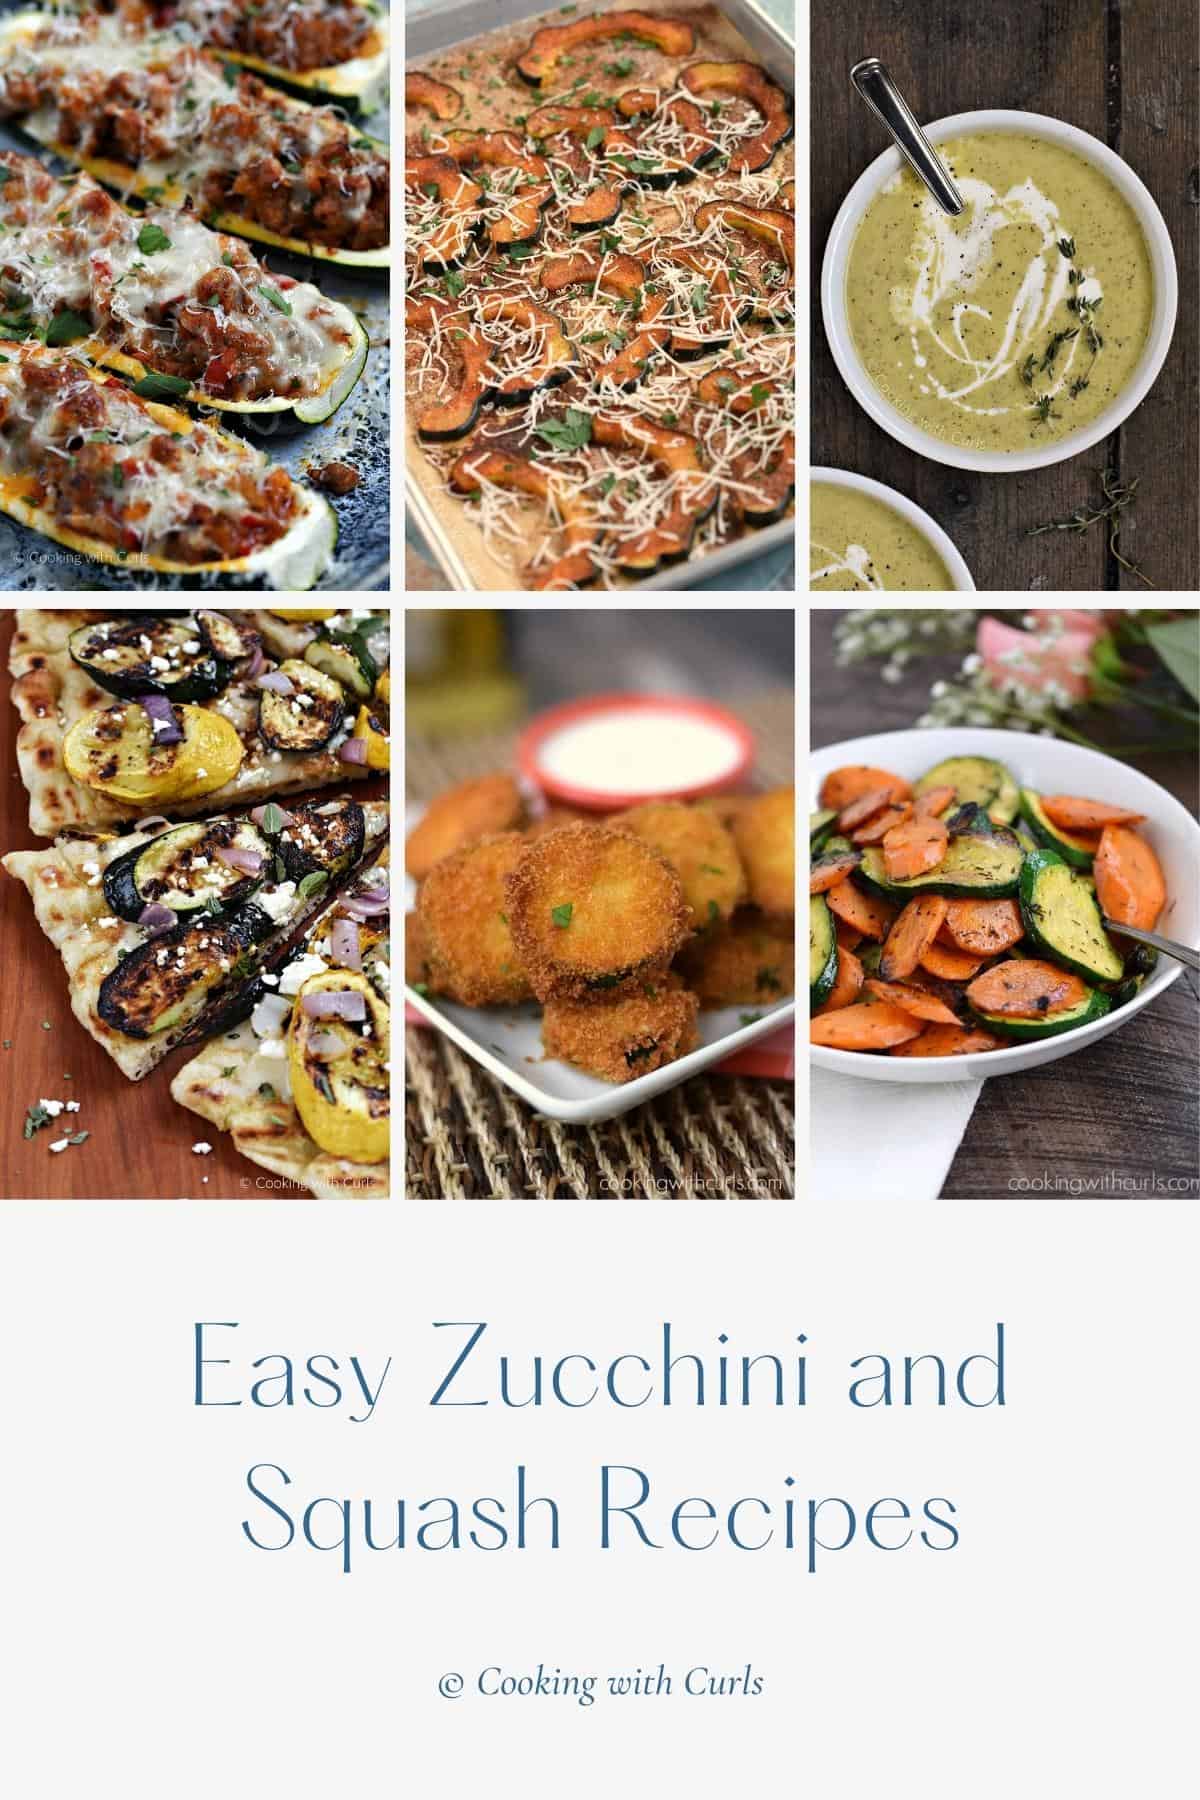 Zucchini and Squash Recipes - Cooking with Curls